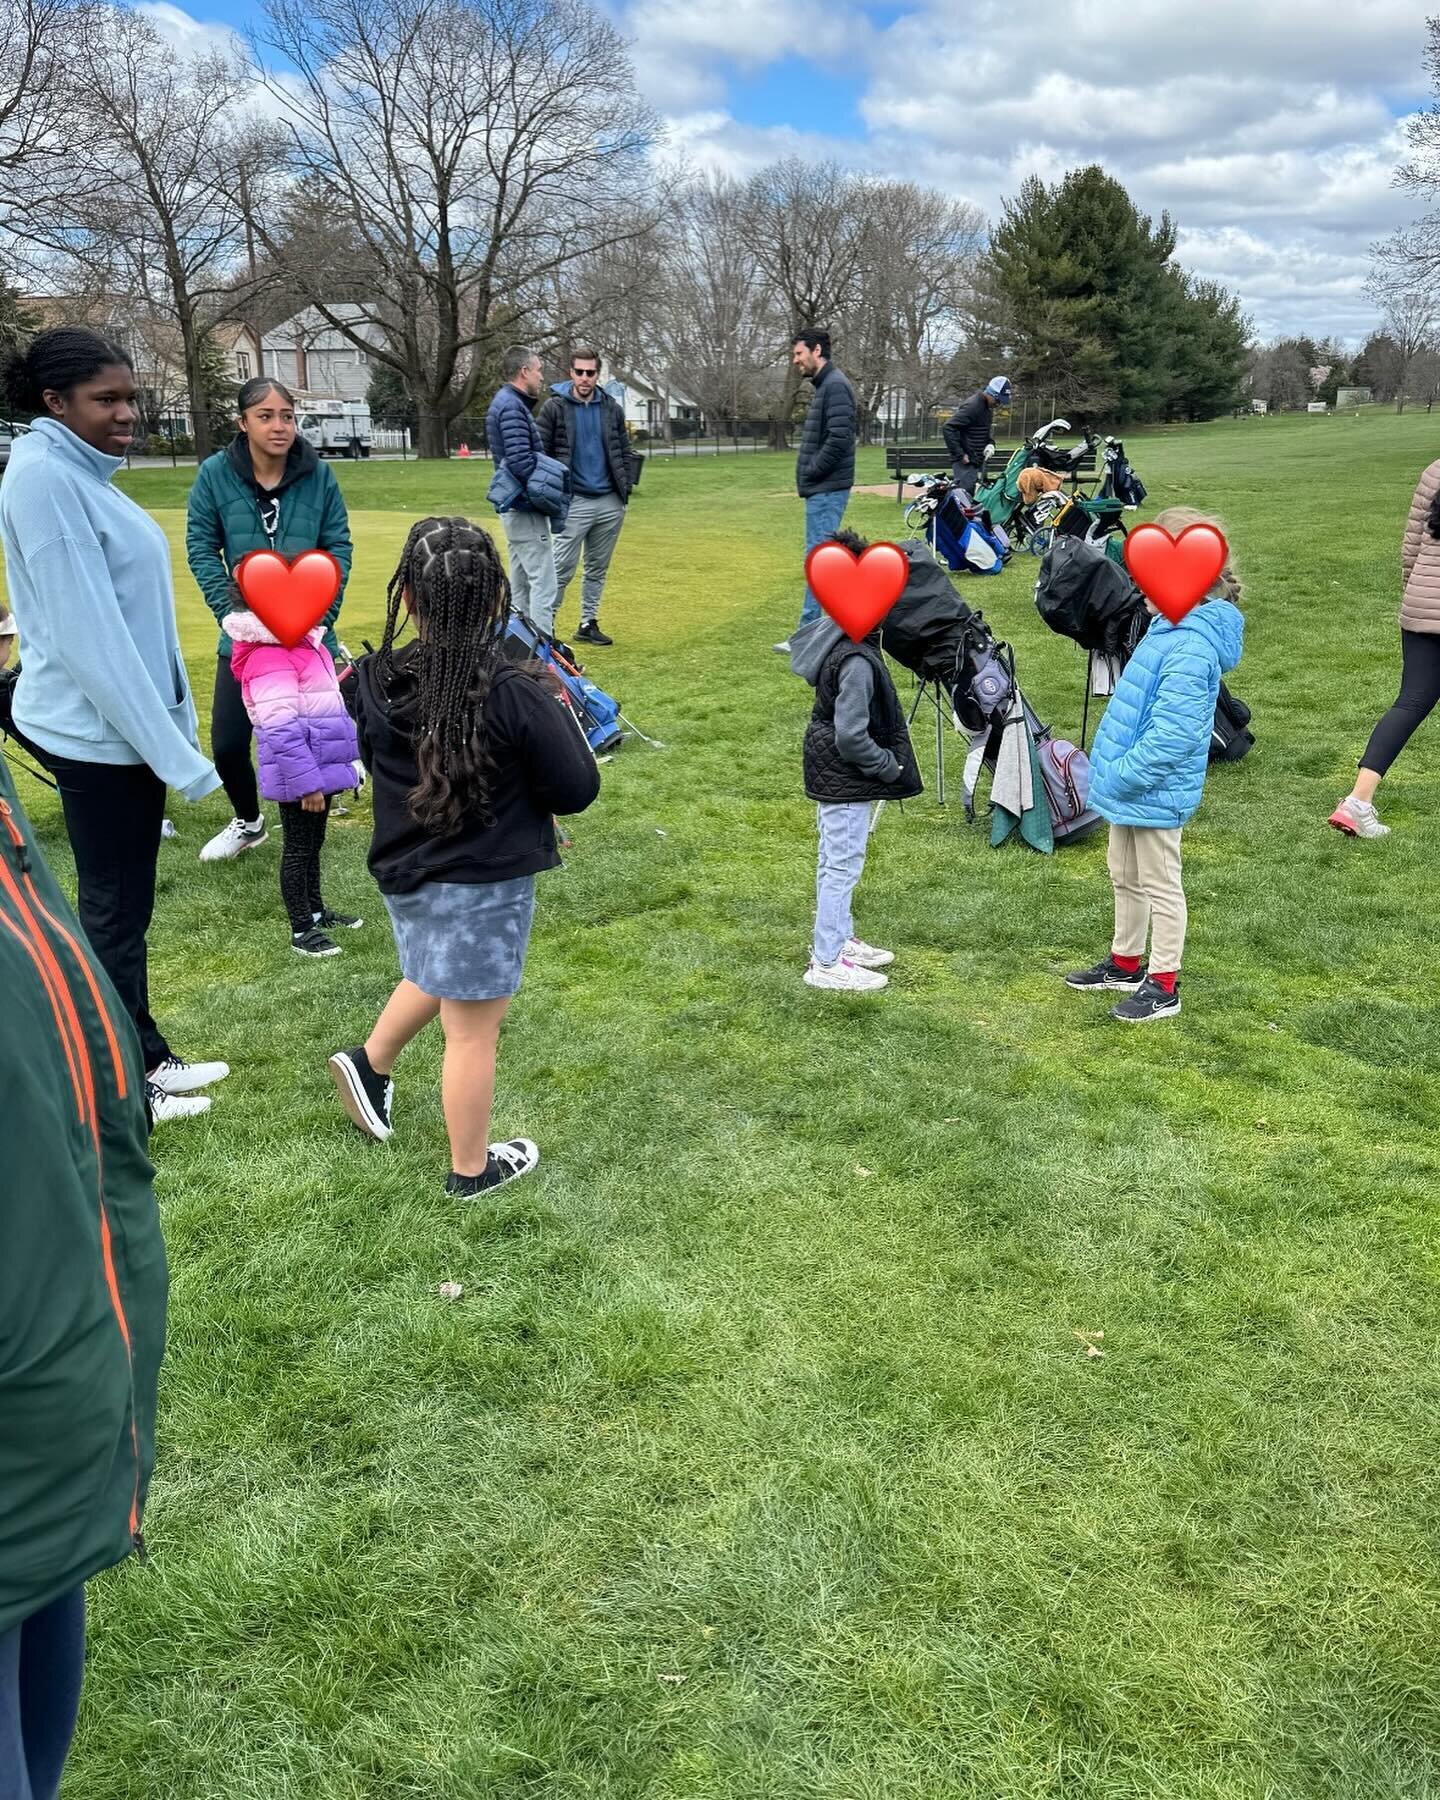 Huge shoutout to #PlainfieldParksAndRecreation! This morning, Veda enjoyed the first of many FREE golf lessons thanks to their partnership with our local First Tee. Parks and Rec keeps both of my kids busy all year with different activities! #plainfi